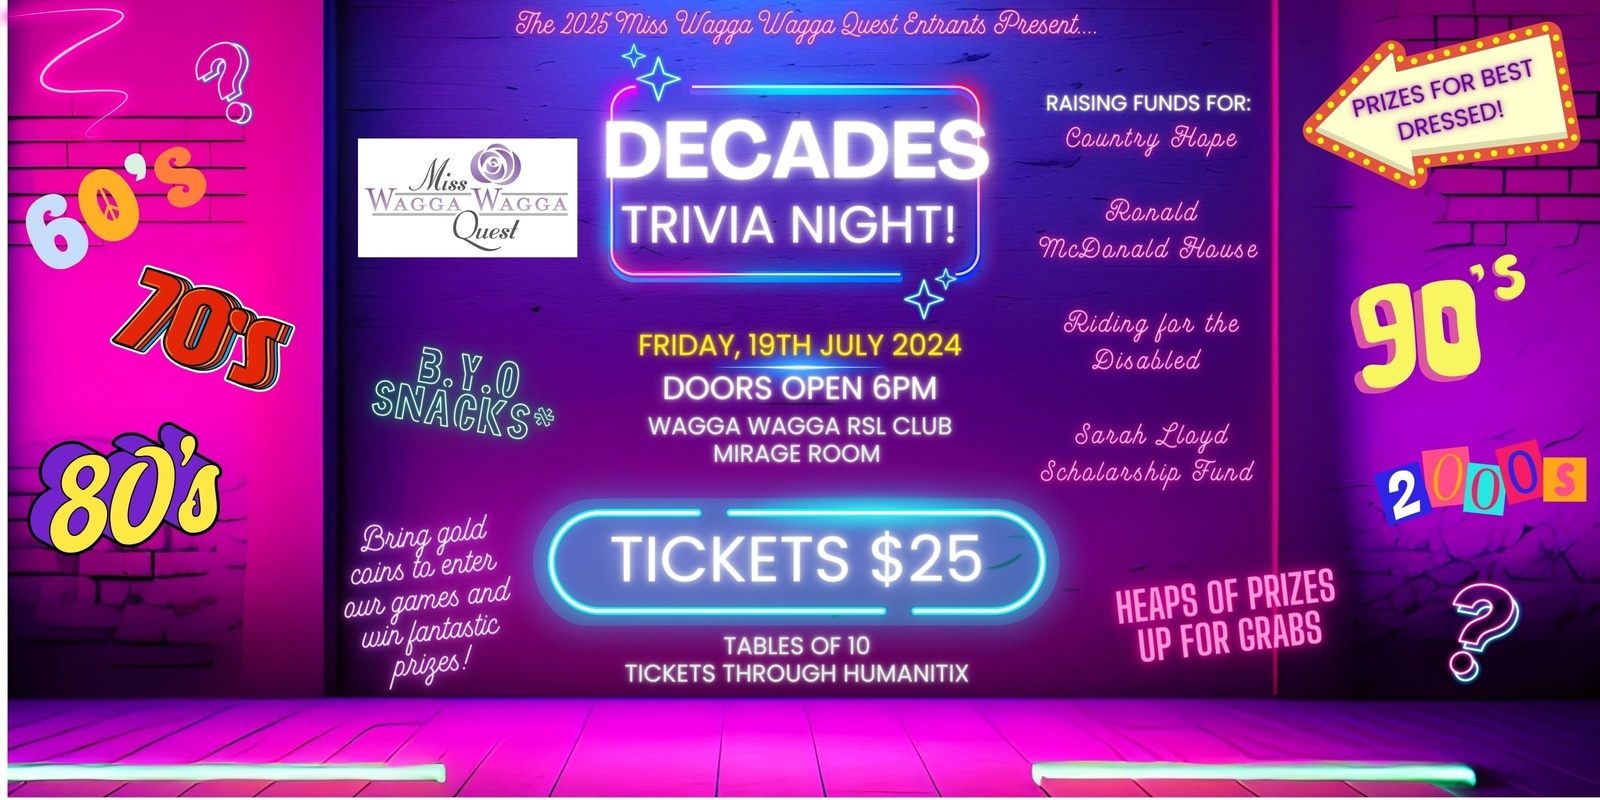 Banner image for Miss Wagga Wagga Quest Entrants - Trivia Night 